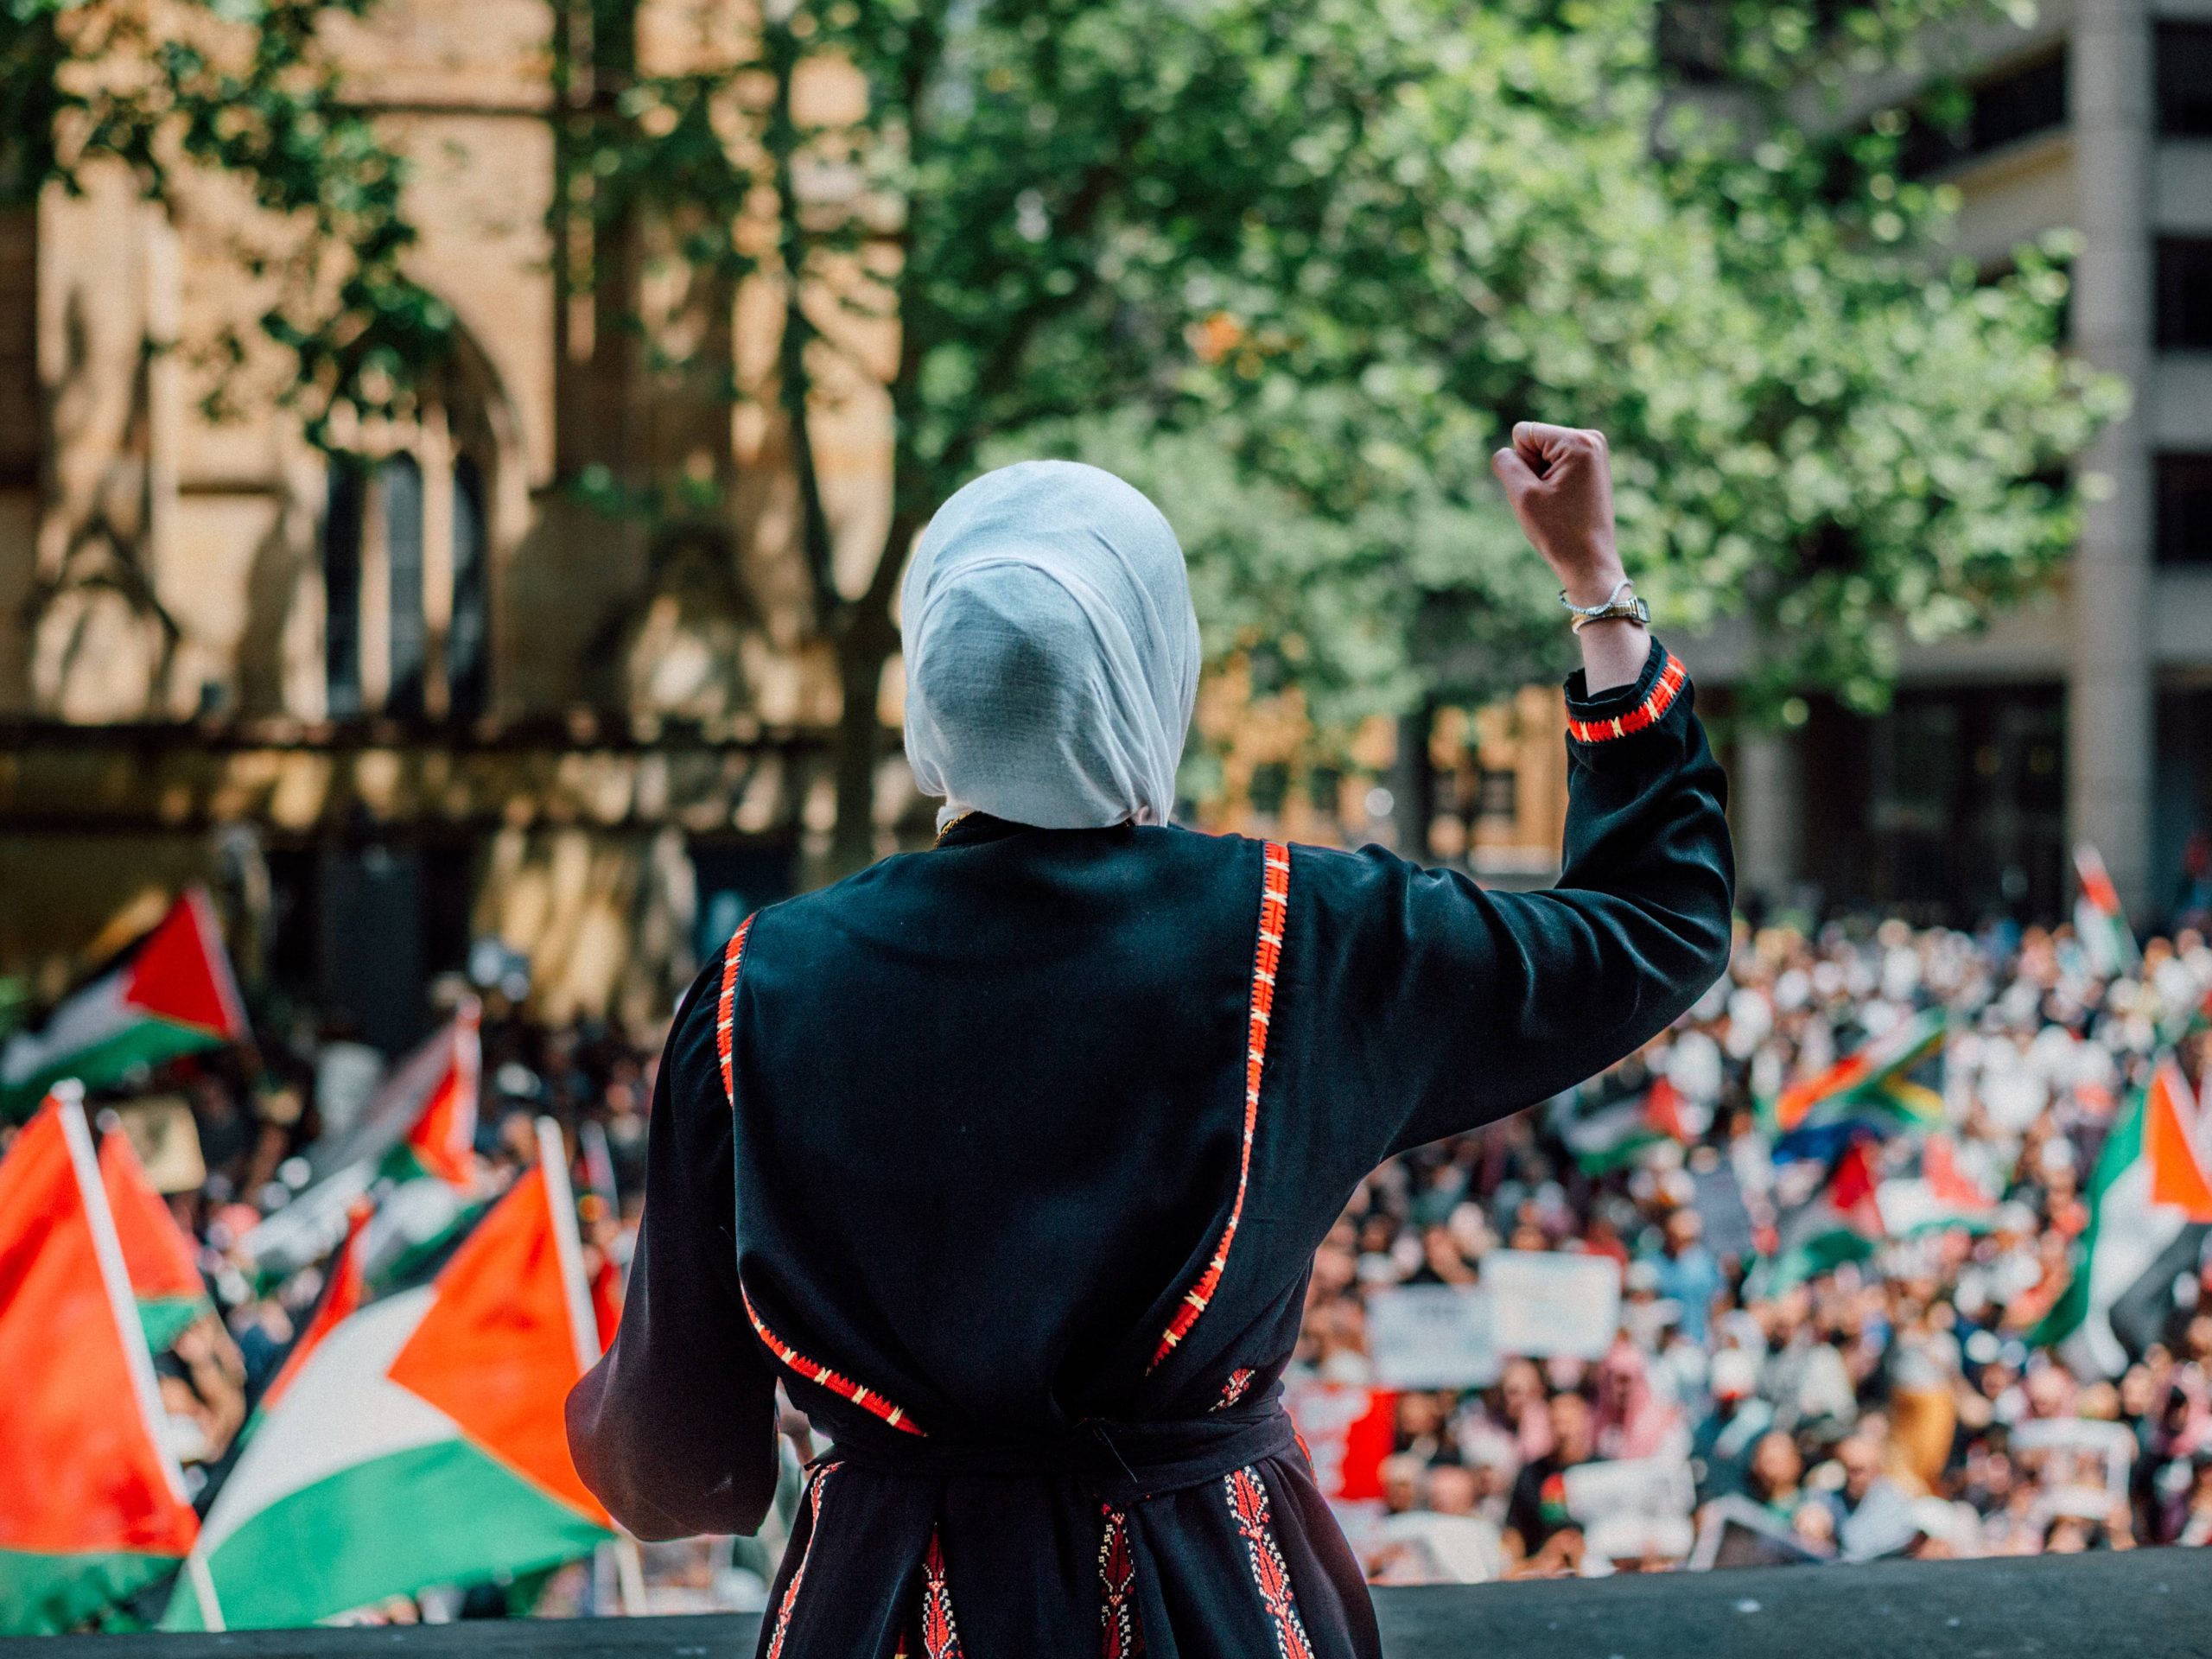 An image of a woman's back addressing a crowd at a pro-Palestine protest